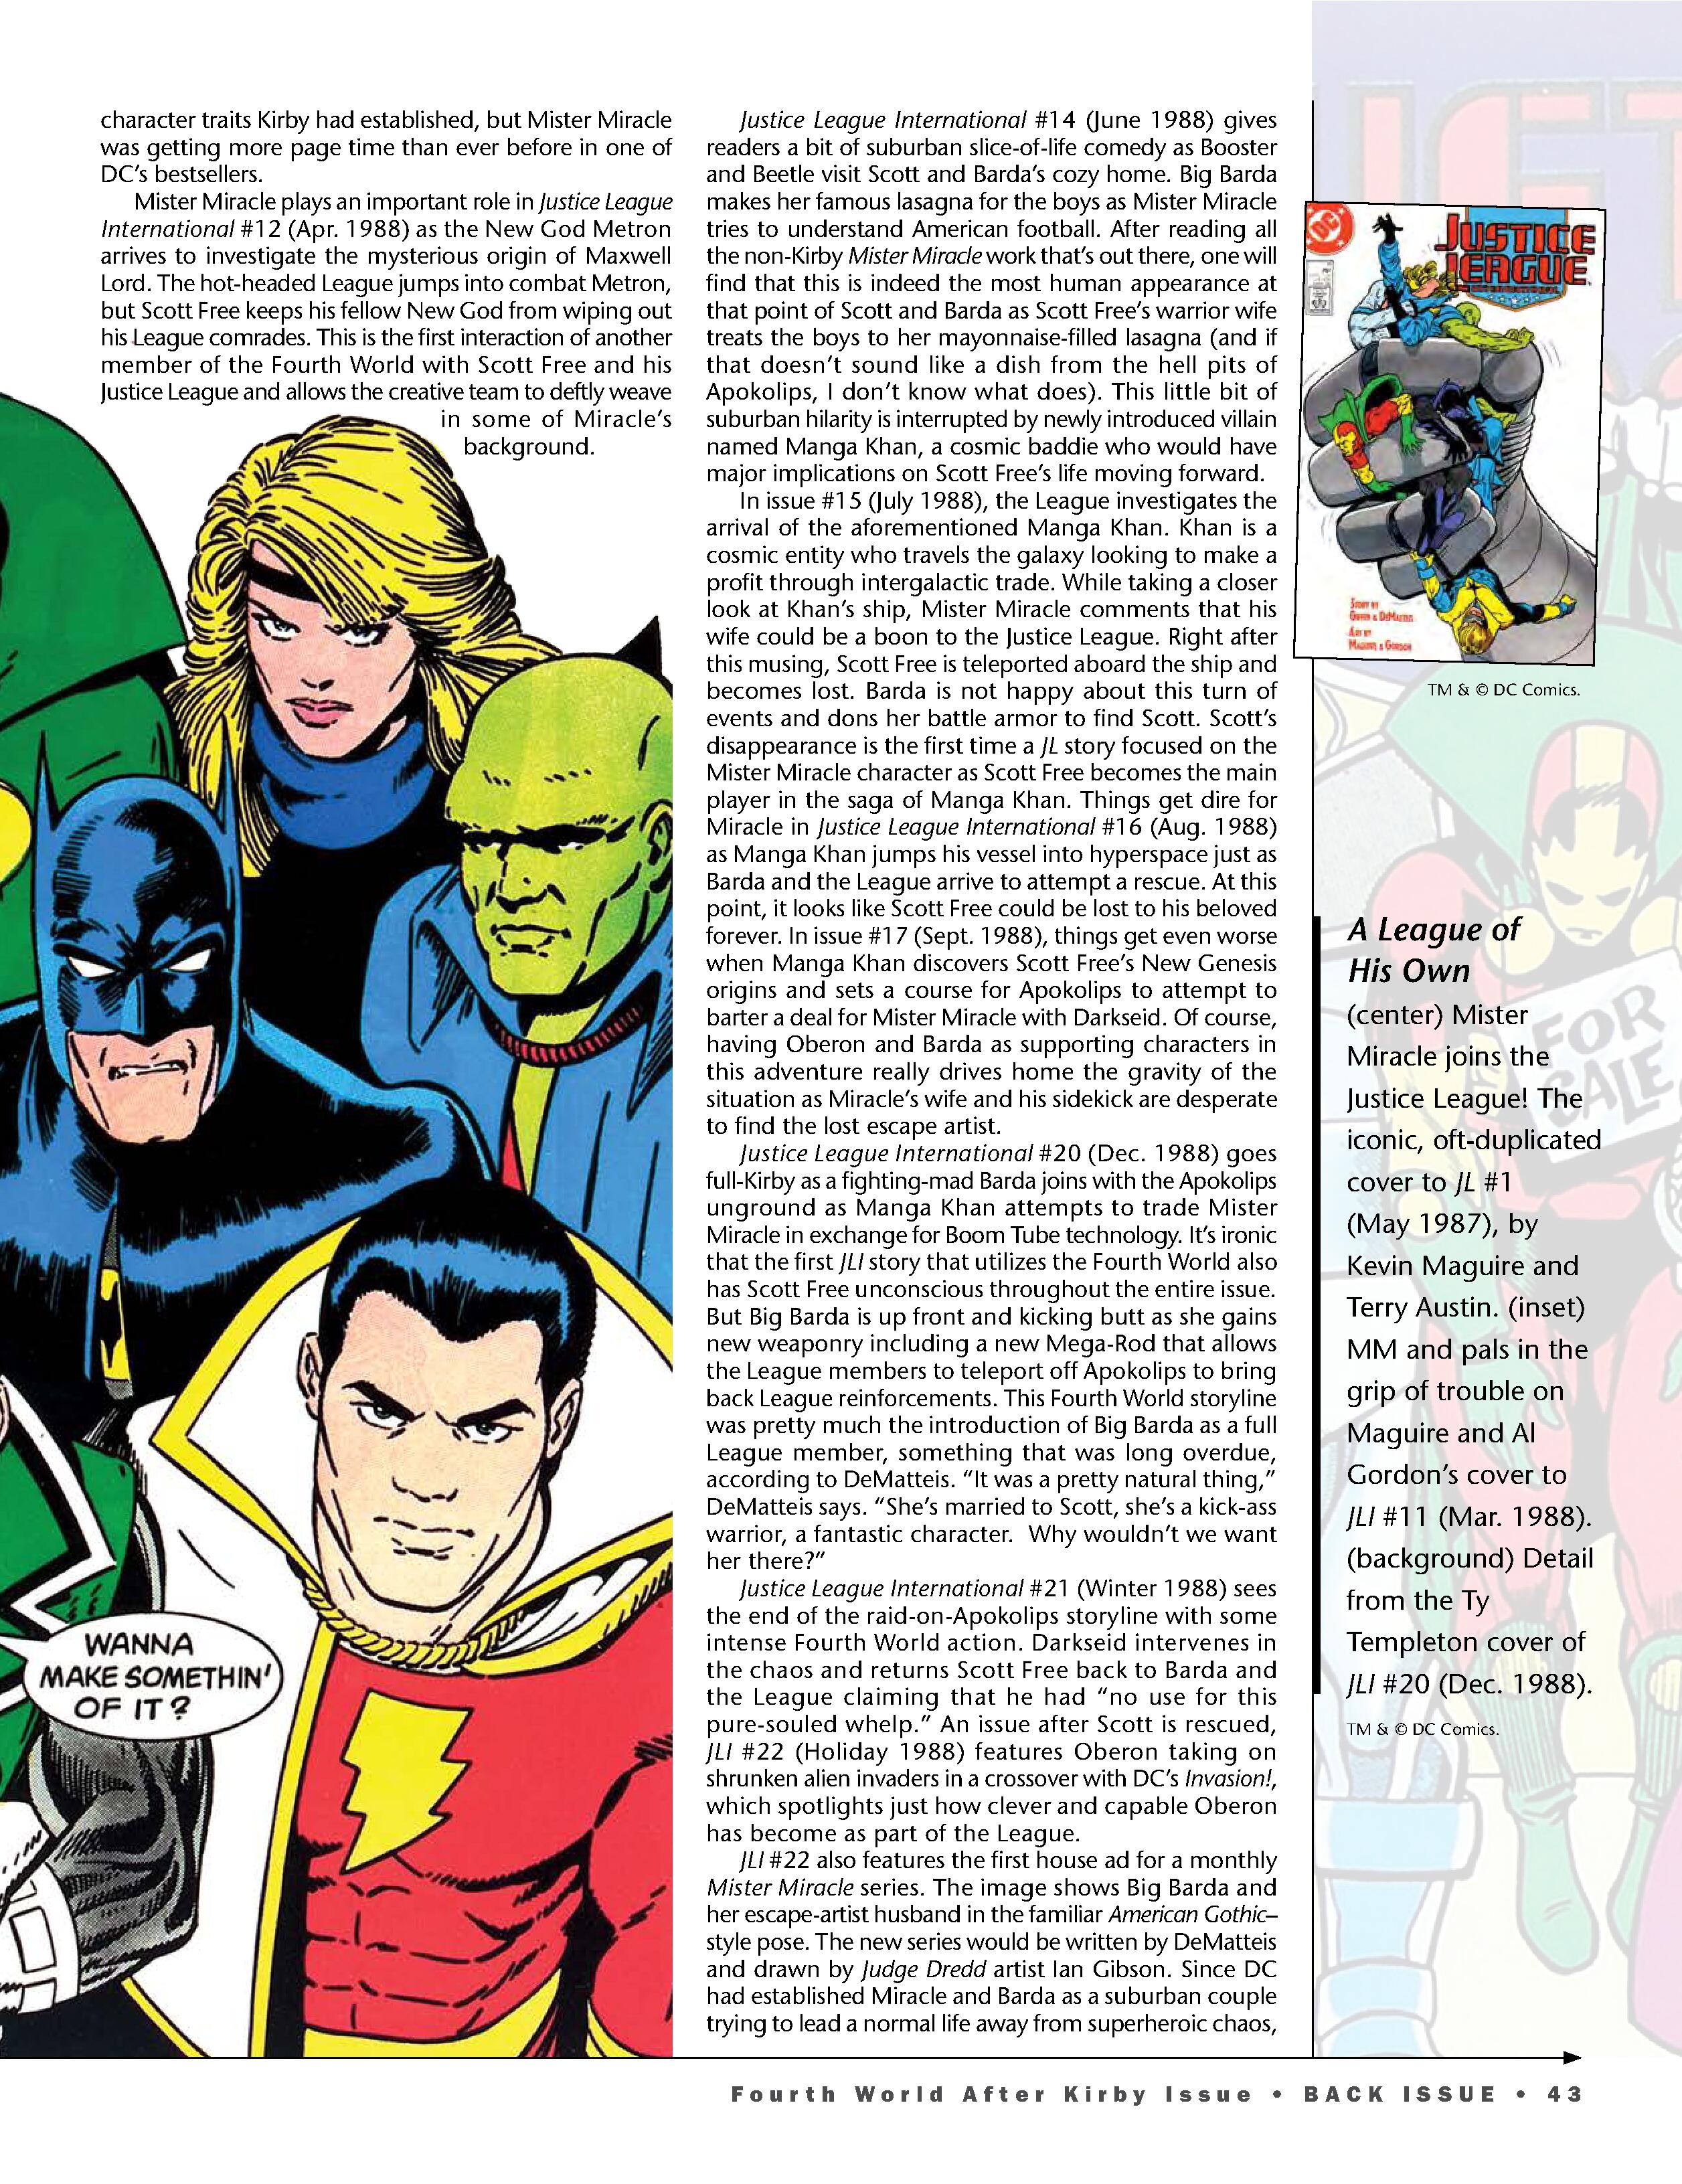 Read online Back Issue comic -  Issue #104 - 45